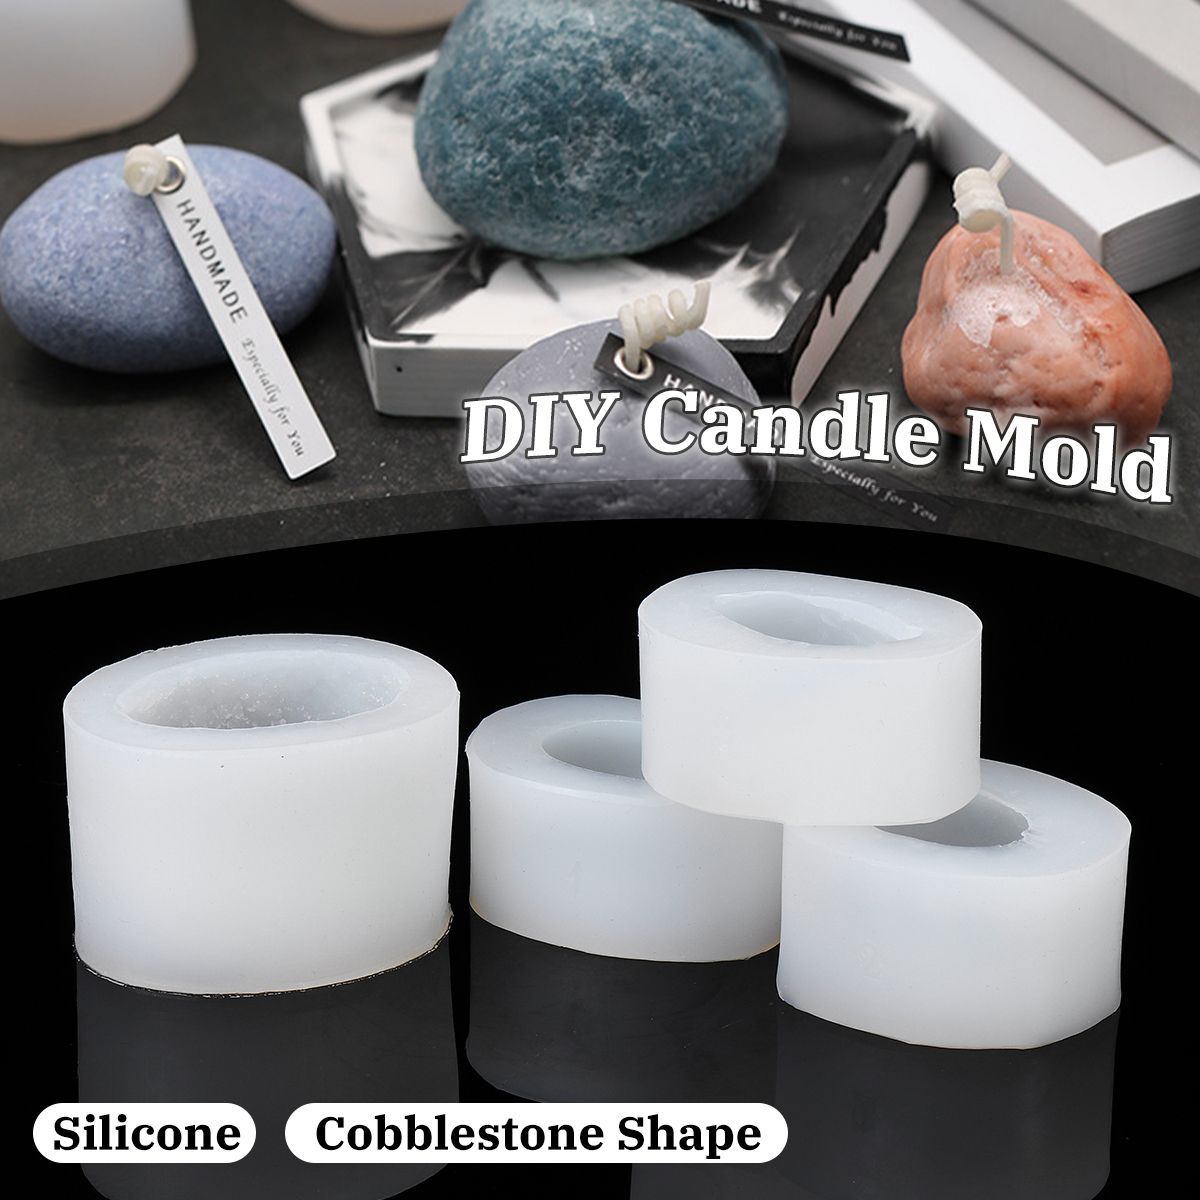 DIY-Candle-Silicone-Mold-Cobblestone-Handmade-Craft-Candle-Making-Mould-1602243